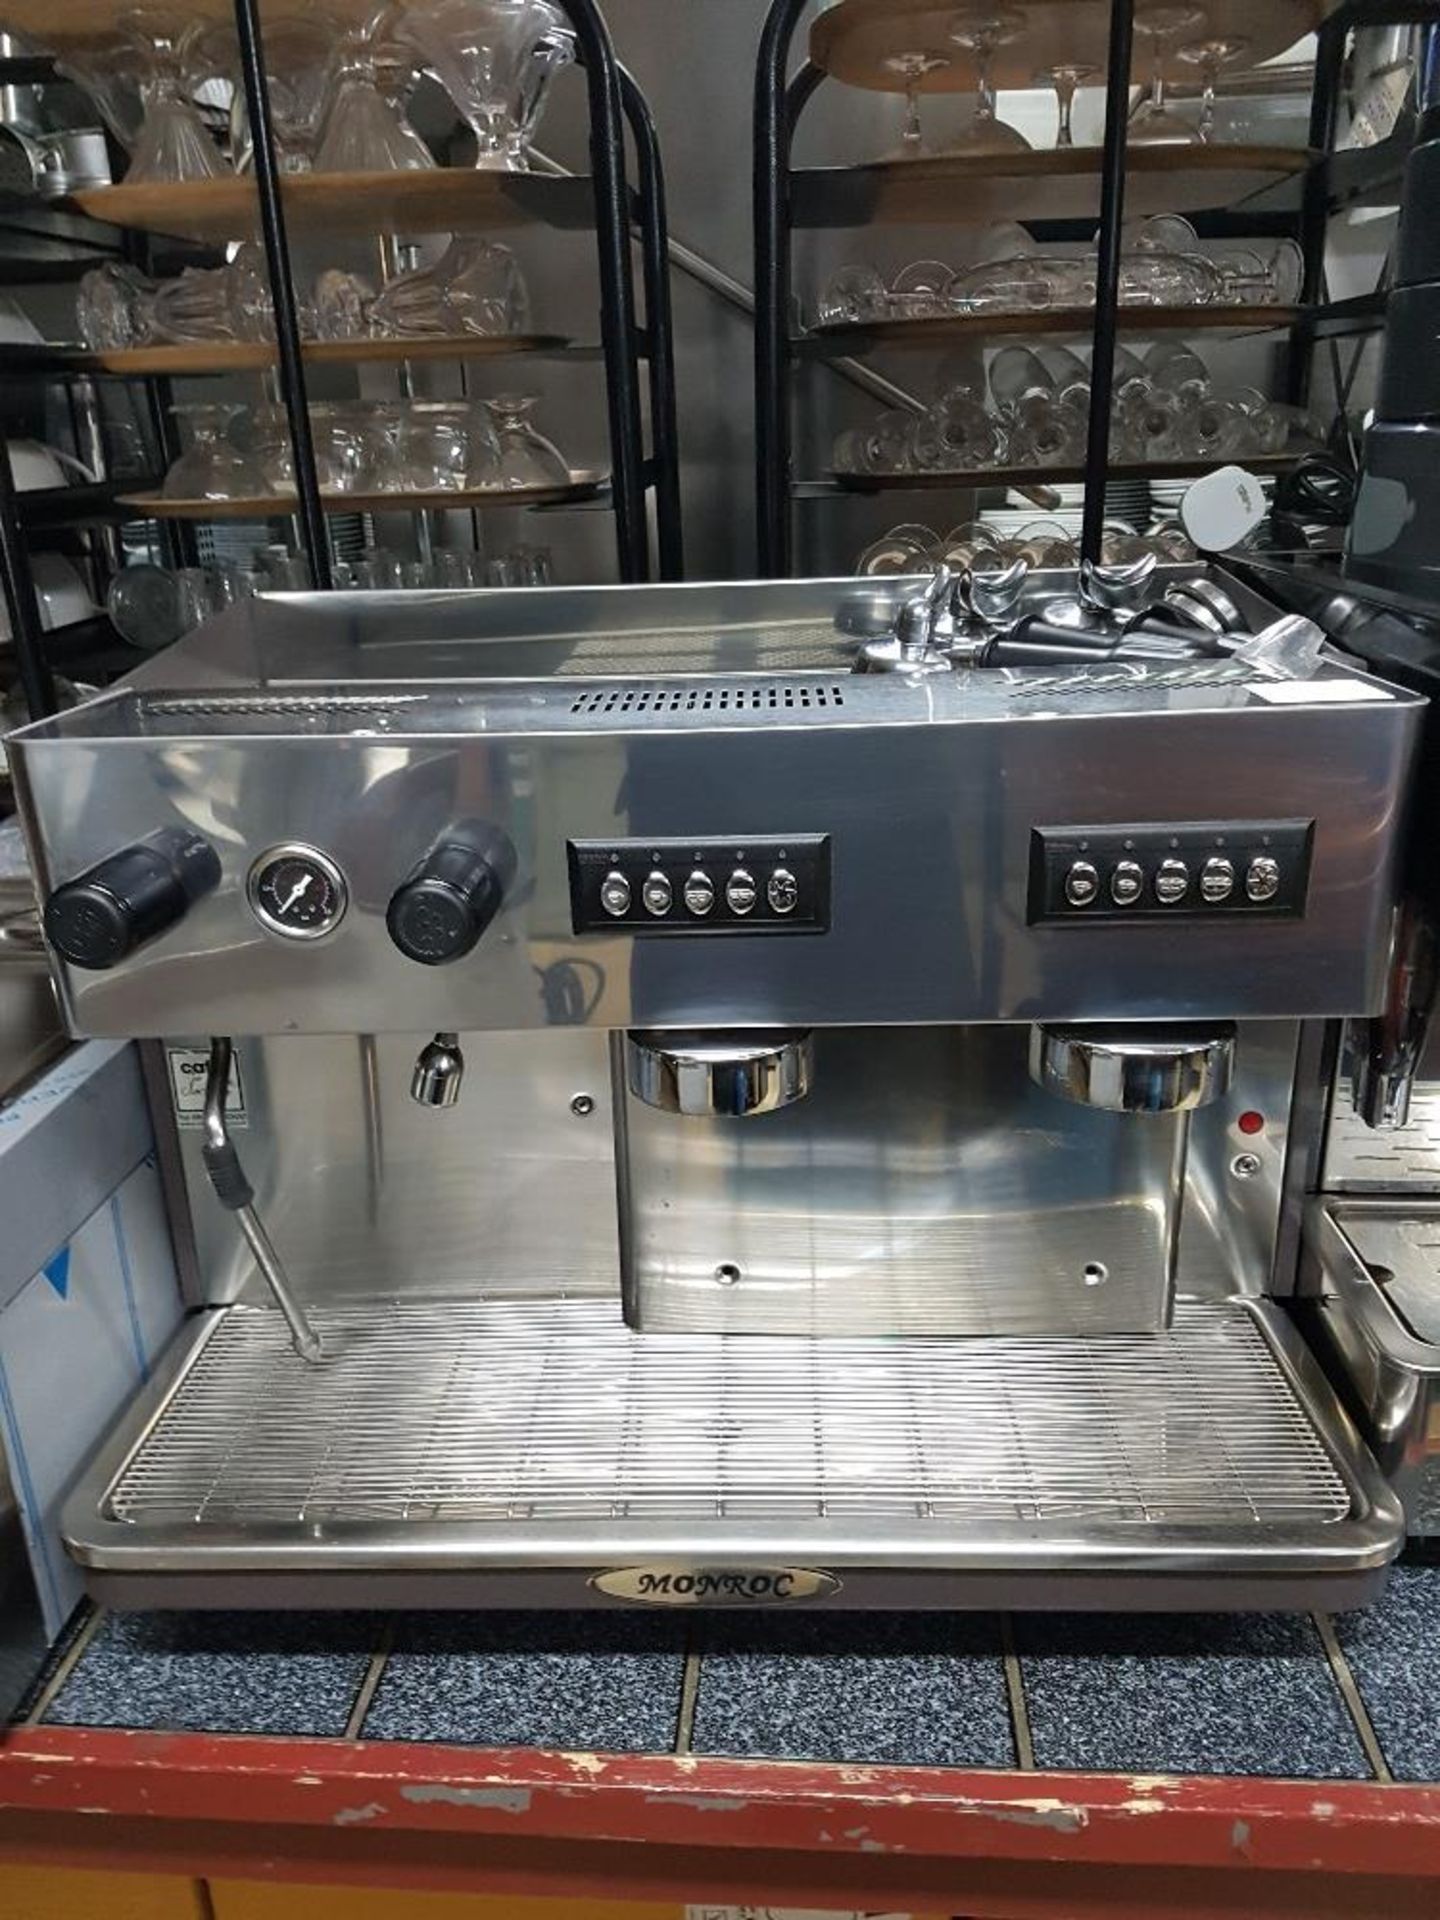 Monroc Auto two Group Espresso / Cappuccino Coffee Machine – V/ Clean Fully Serviced -1ph – Buyer to